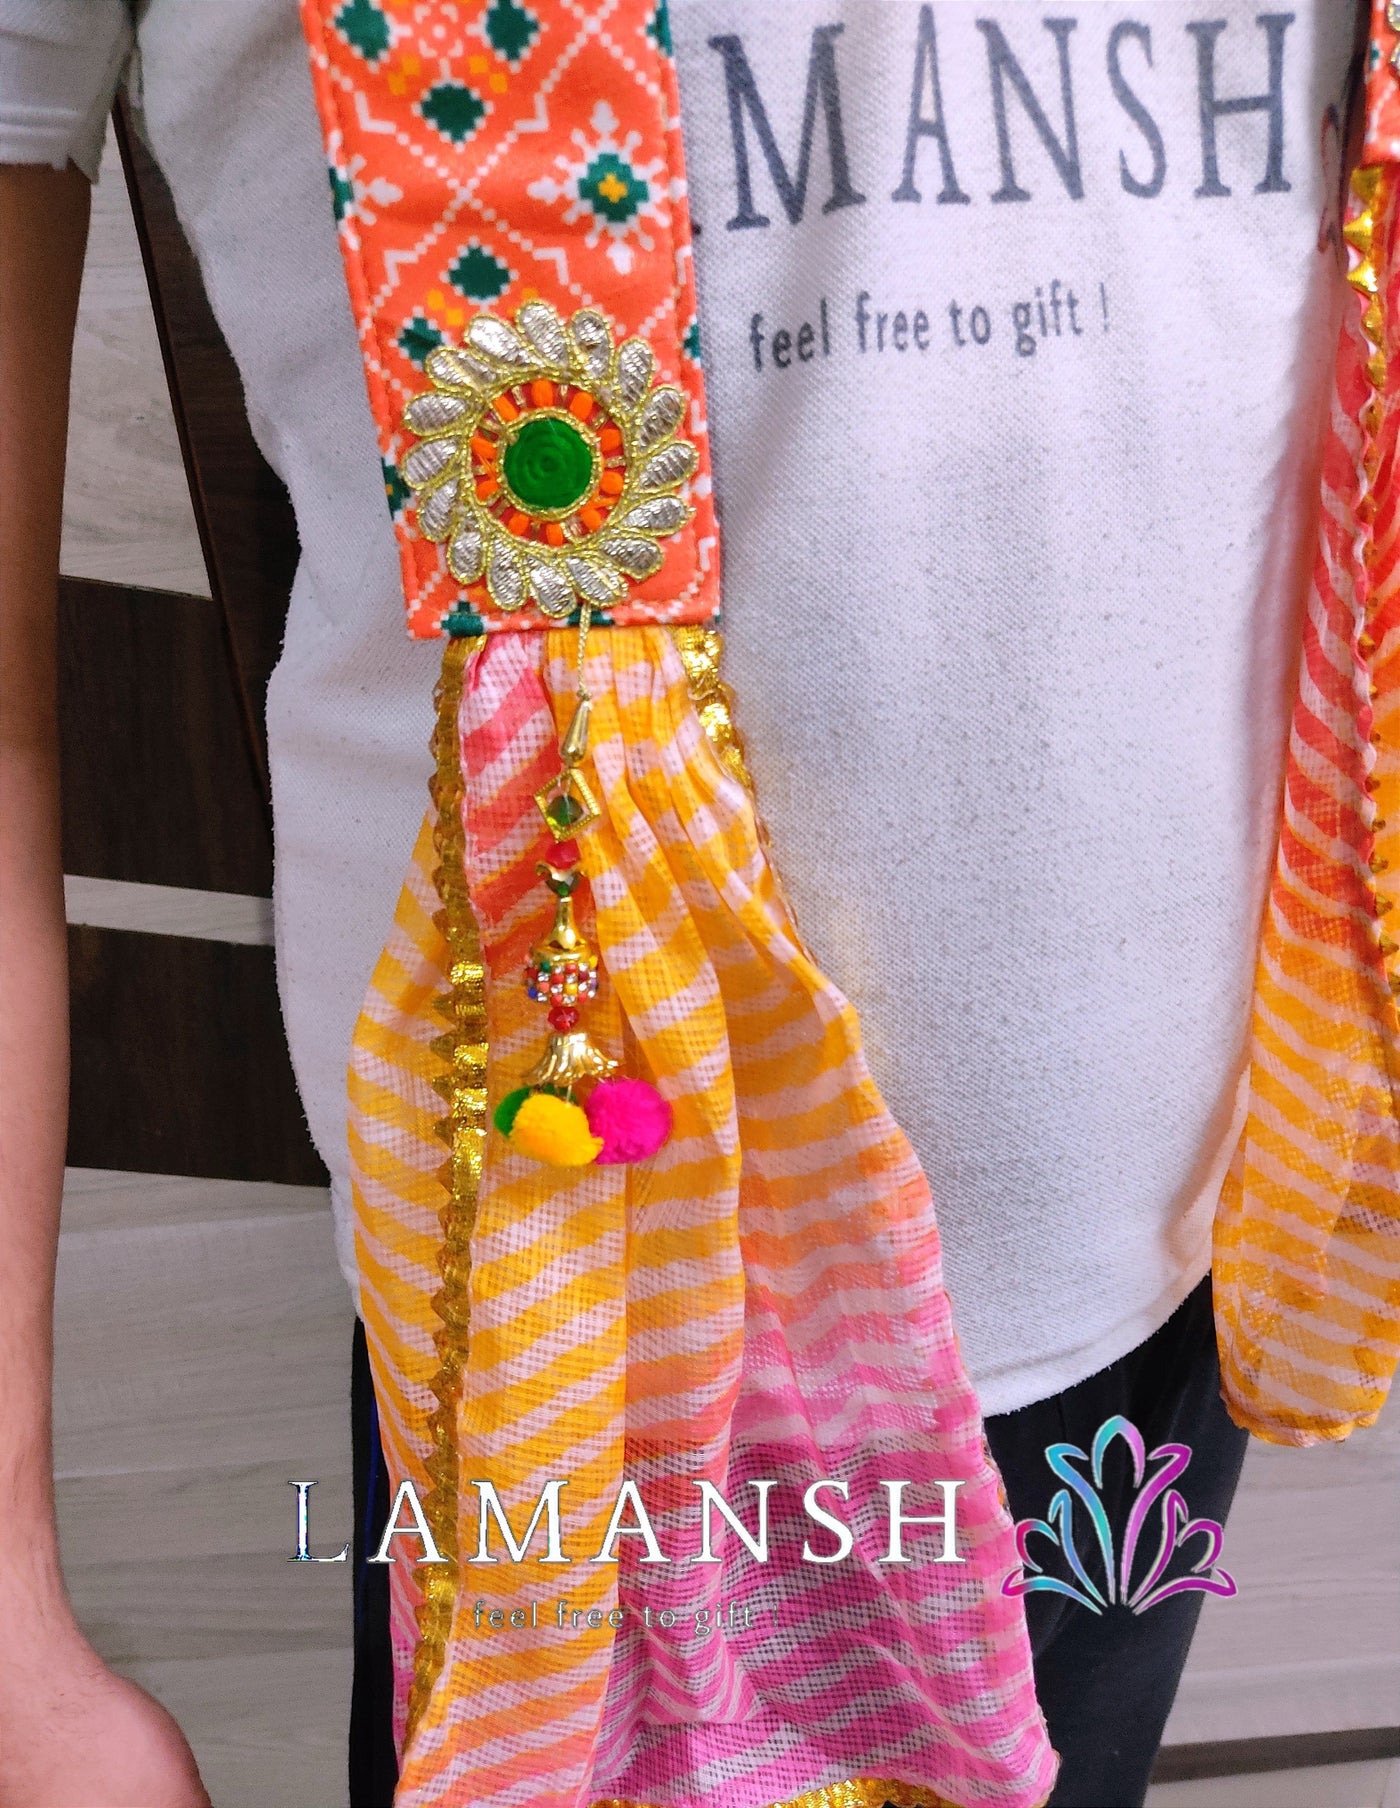 Lamansh guests welcome stoles LAMANSH® Fabric Welcome Stoles for Wedding Guests Barati | Patola Lahariya Gota Work Swagat Dupatta's for Gents & Female Guests